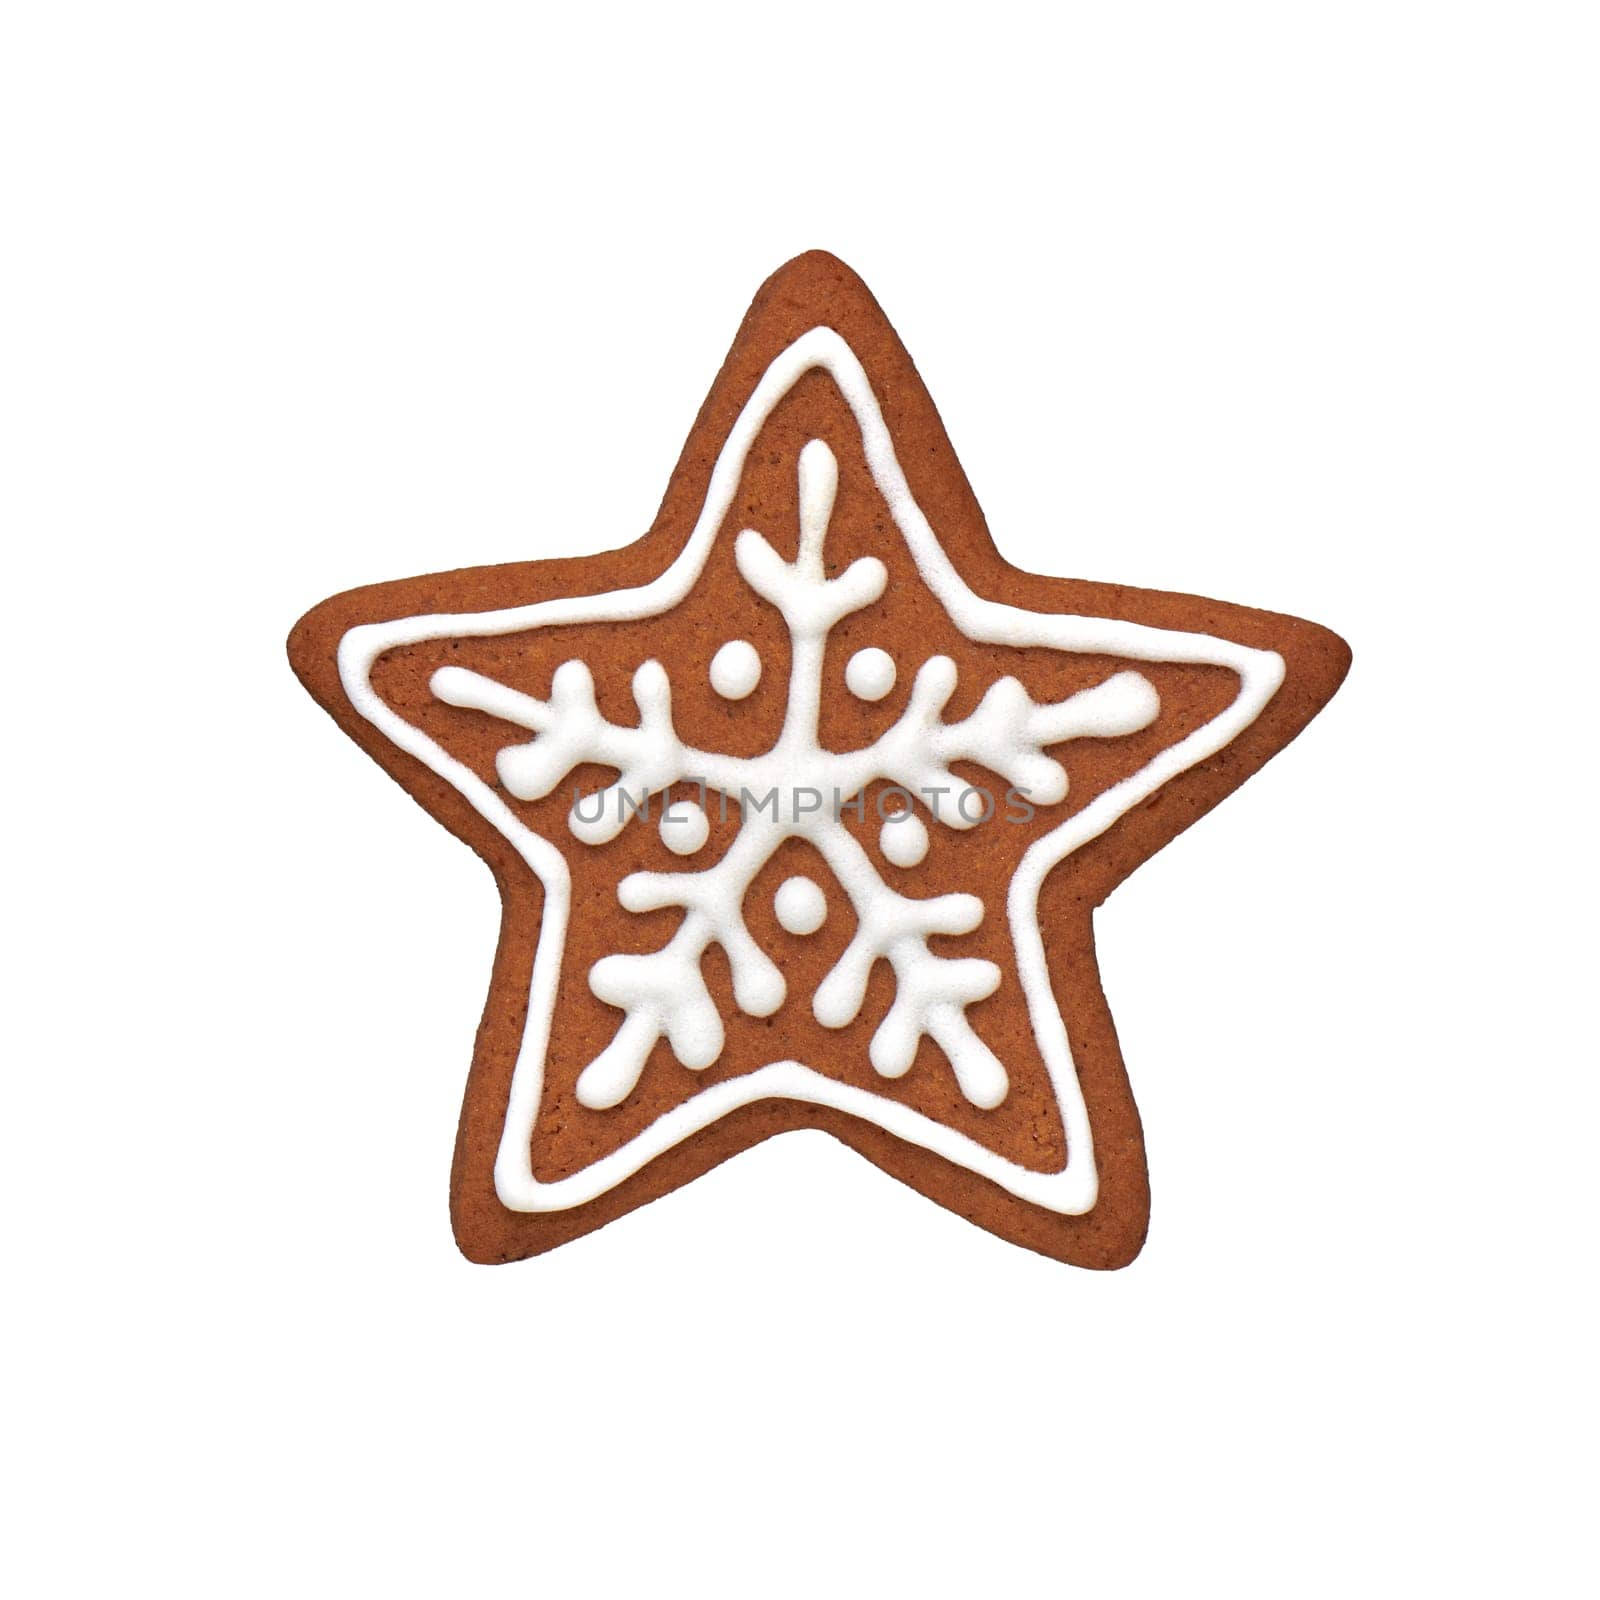 Painted gingerbread cookie in the shape of a star by maxcab